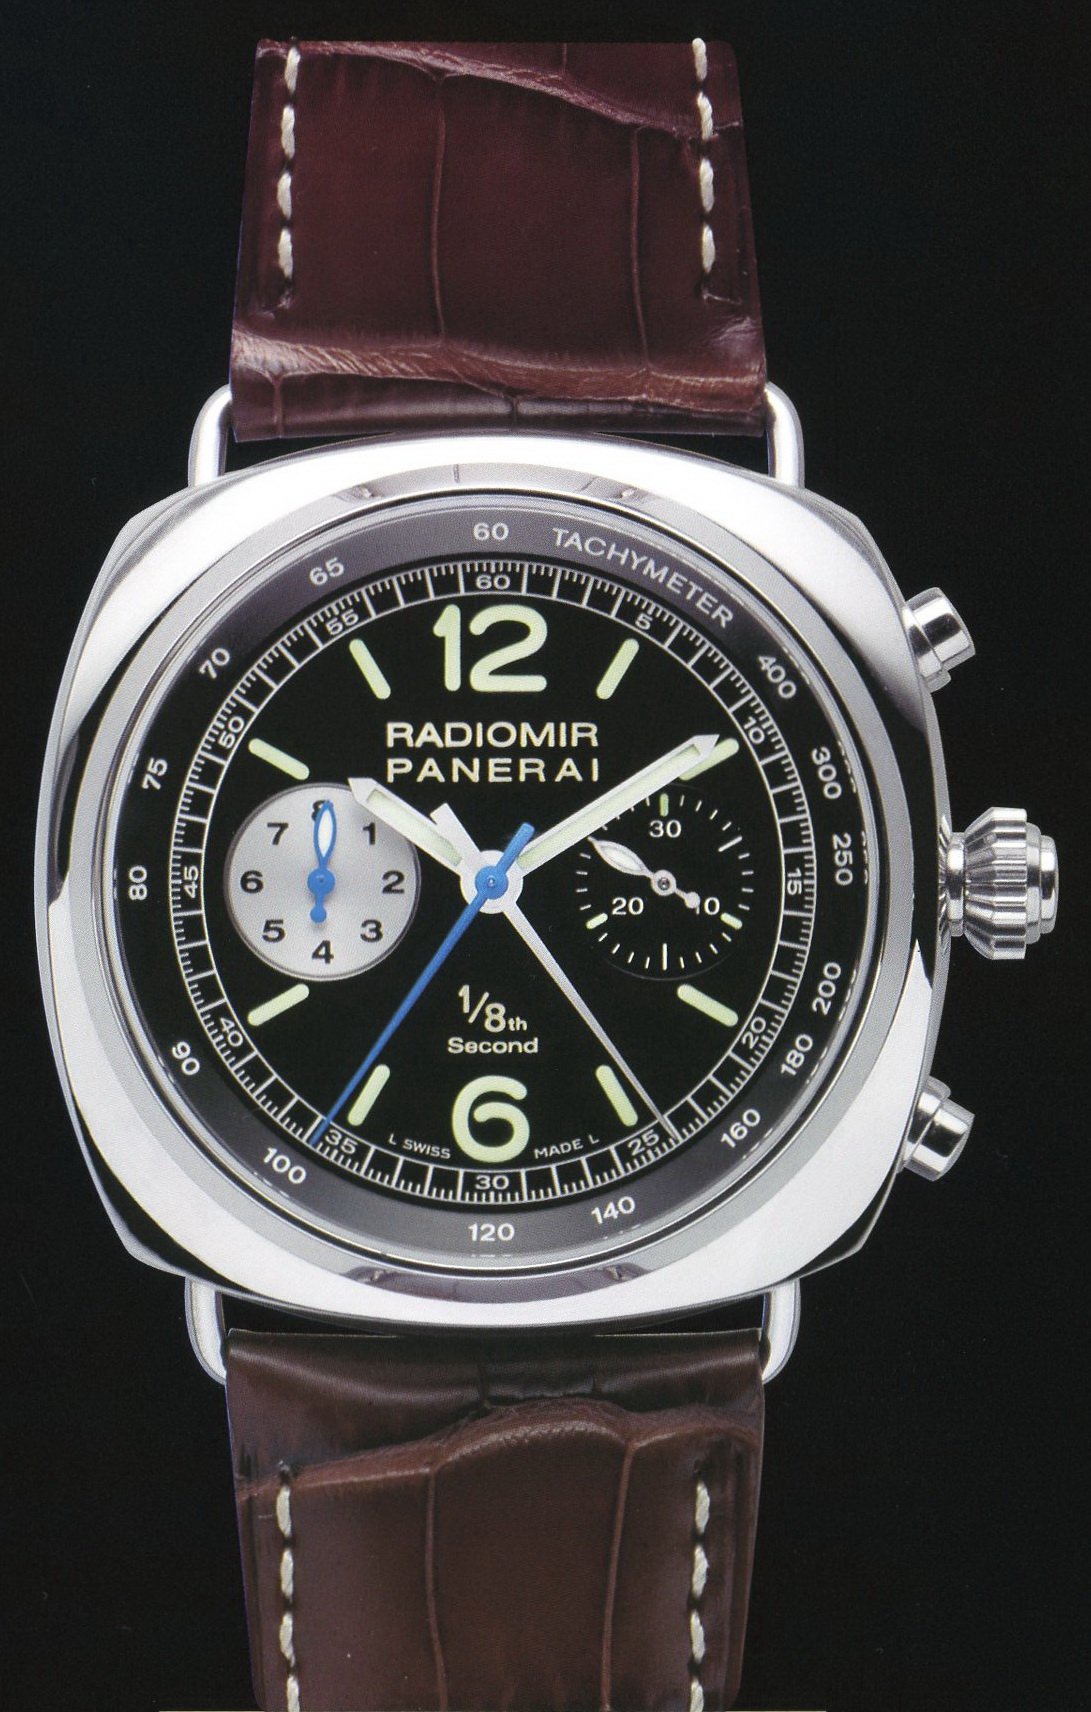  Panerai 2006 Special Edition Radiomir one-eighth second